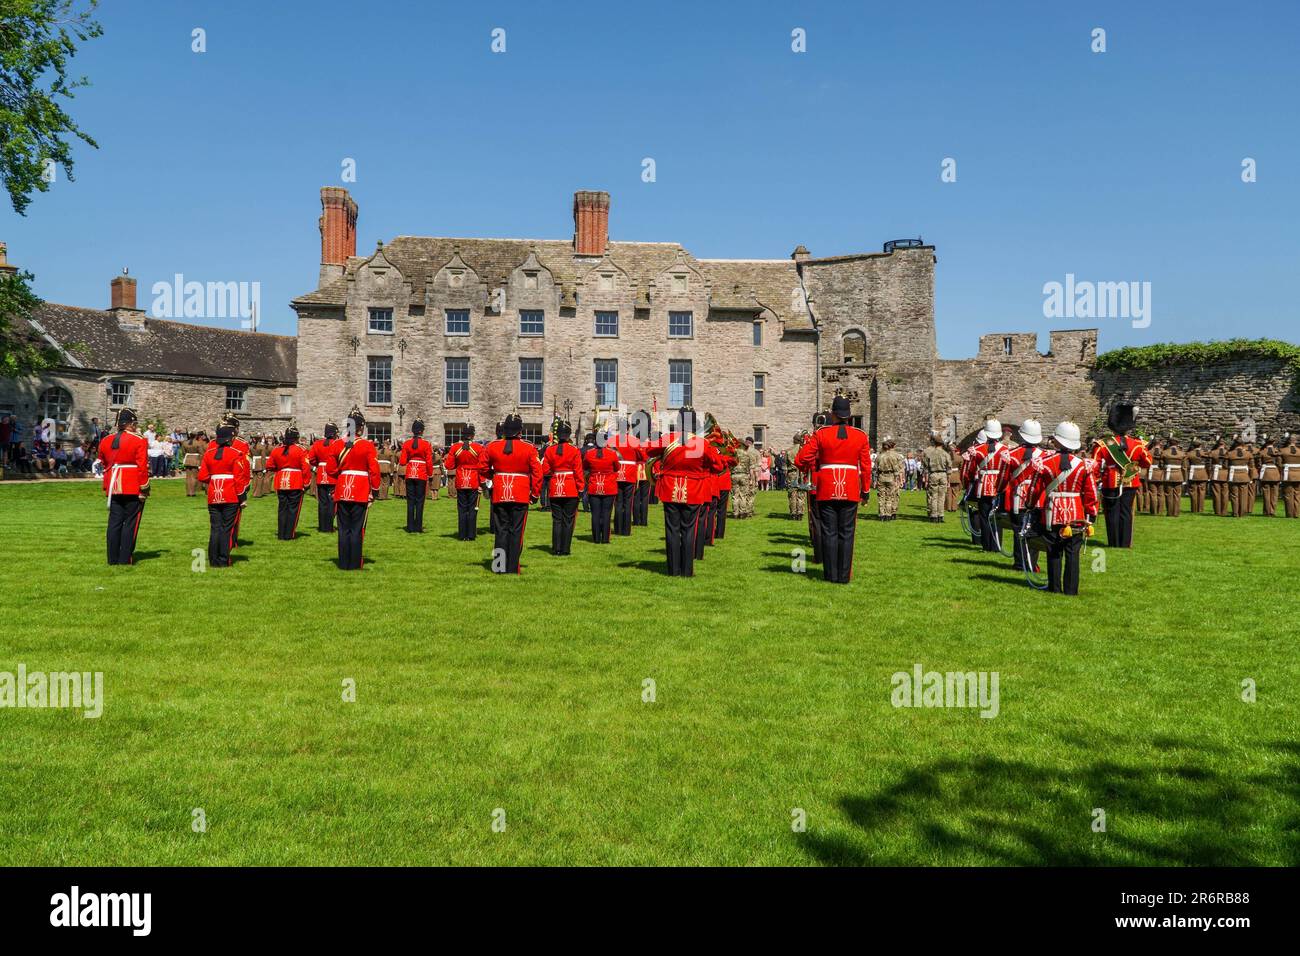 Royal Welsh Military Band, veterans and cadets celebrate the reaffirmation for their Freedom of the County in the grounds of Hay Castle Powys Wales UK Stock Photo